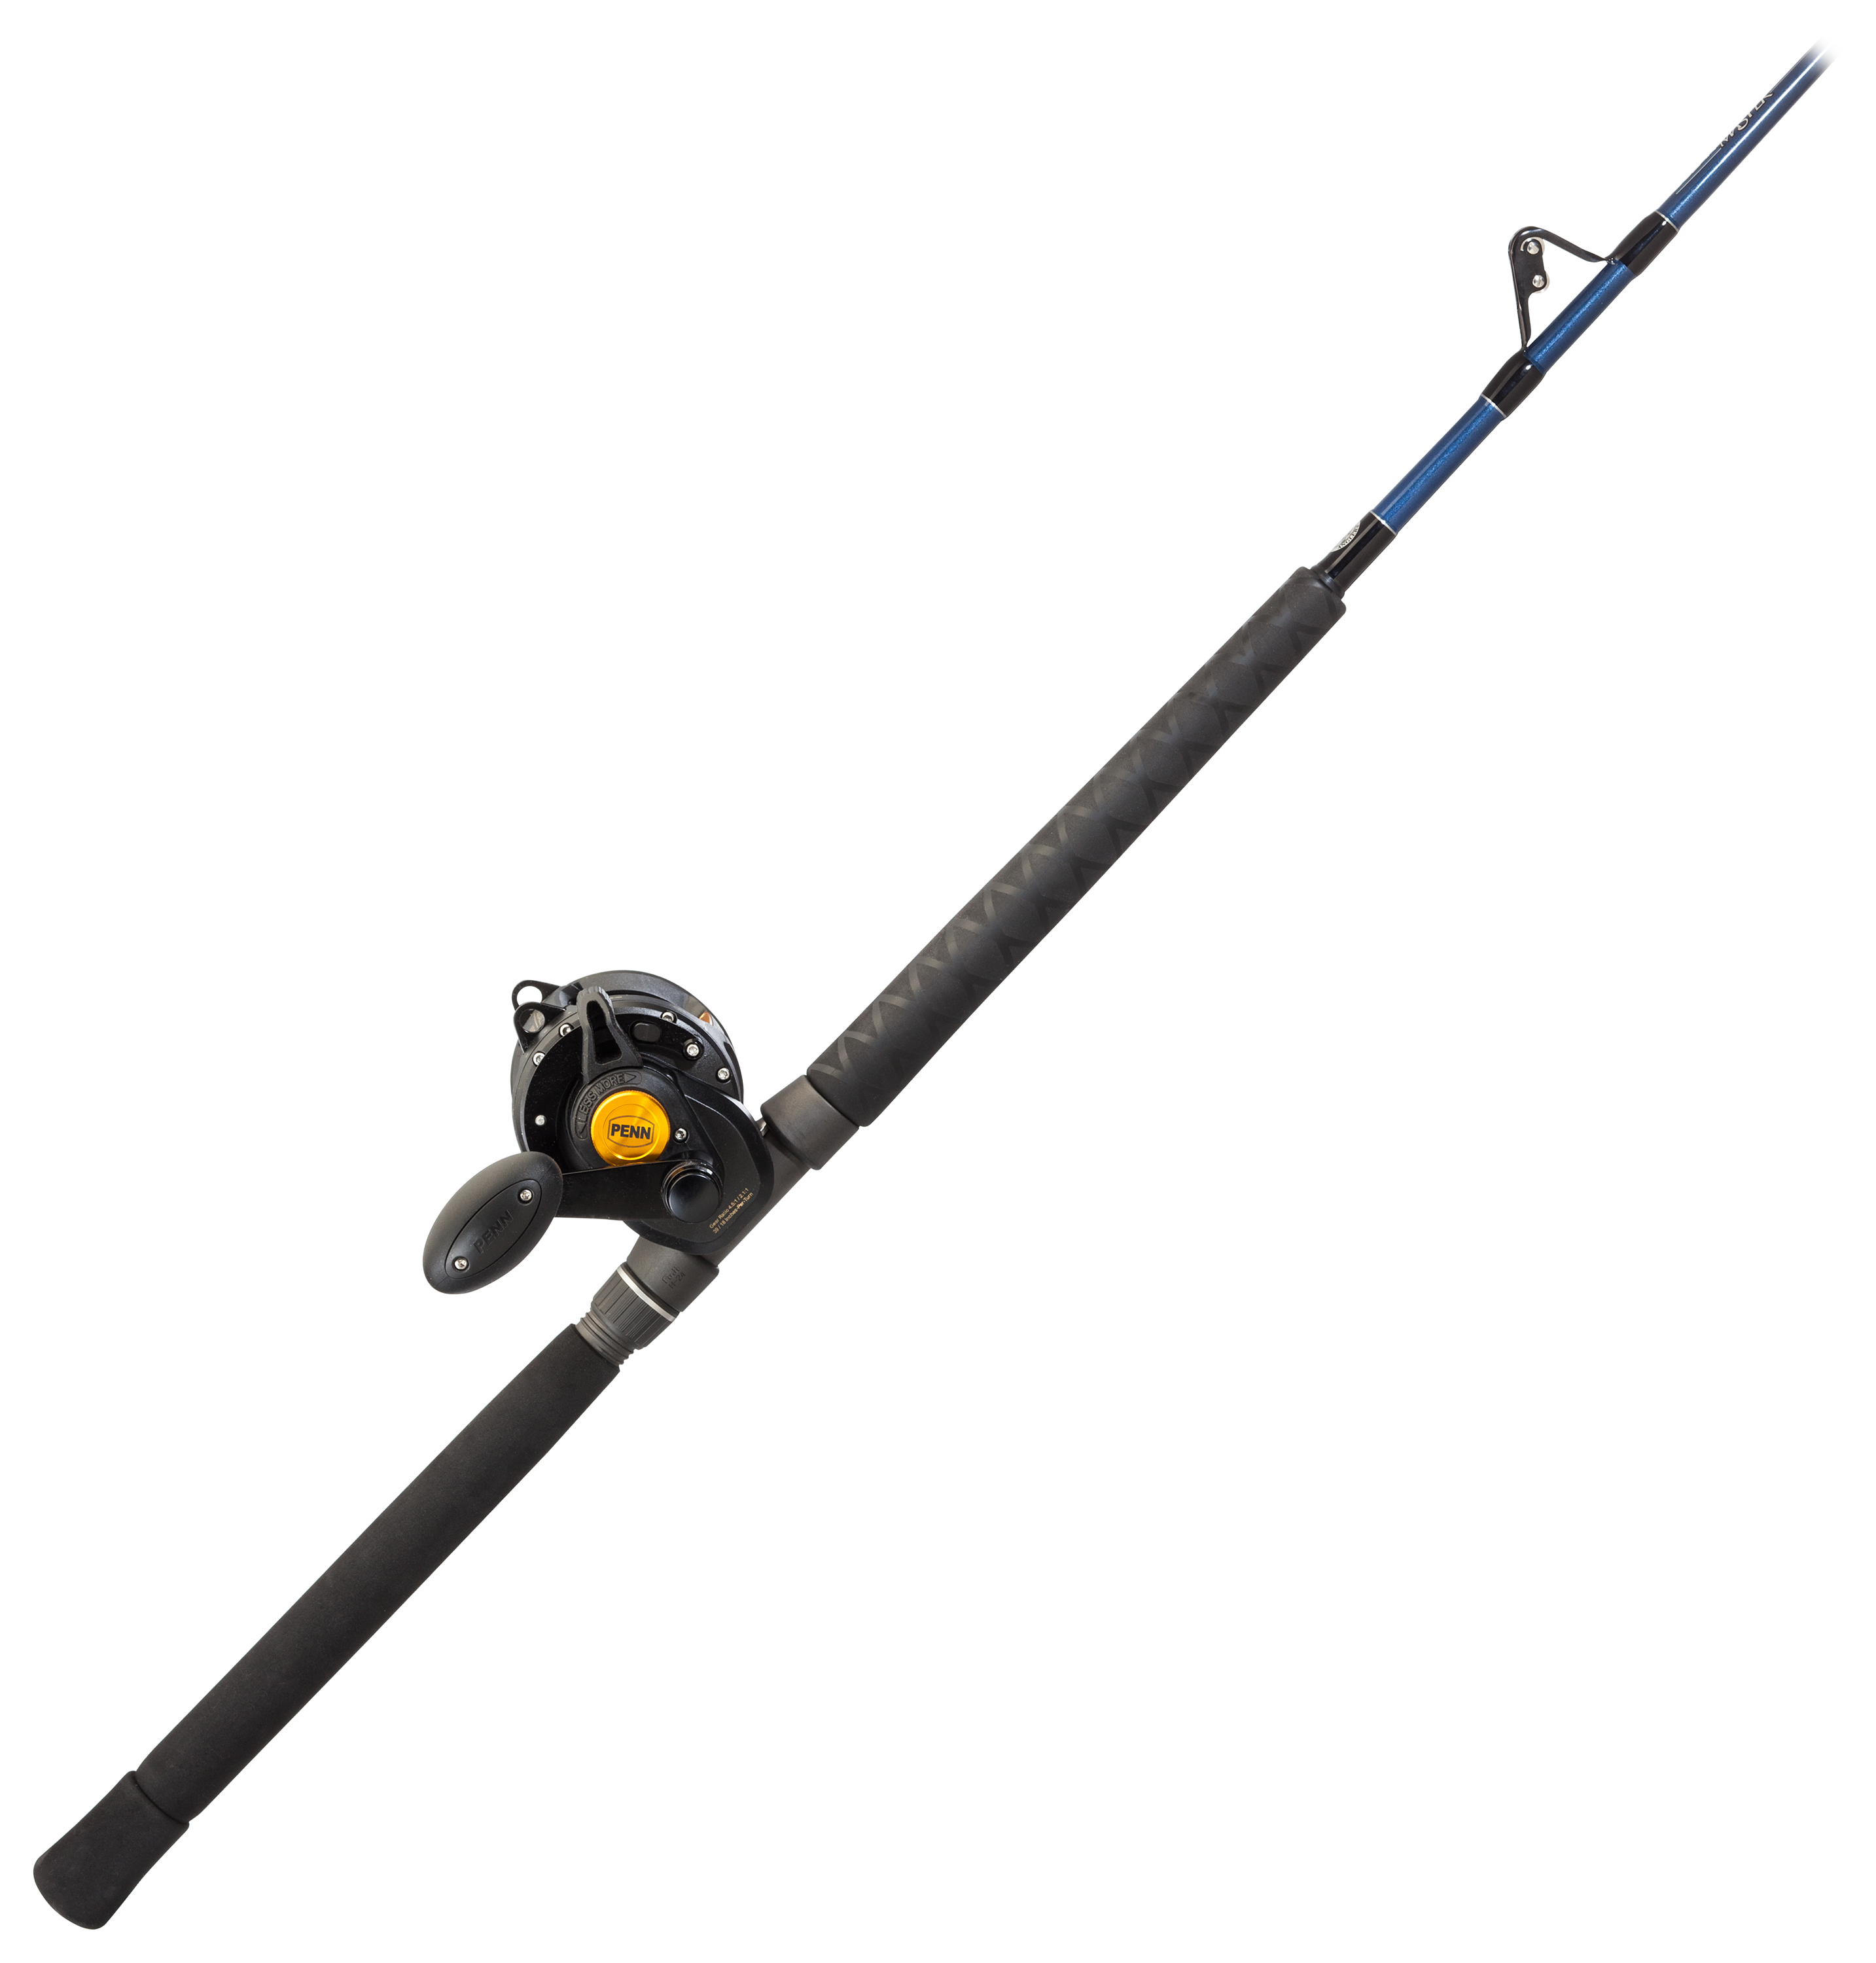 PENN Squall Two-speed Lever Drag Offshore Angler Ocean Master OMSU Stand-Up Rod and Reel Combo - SQL16VS OMSU-OC